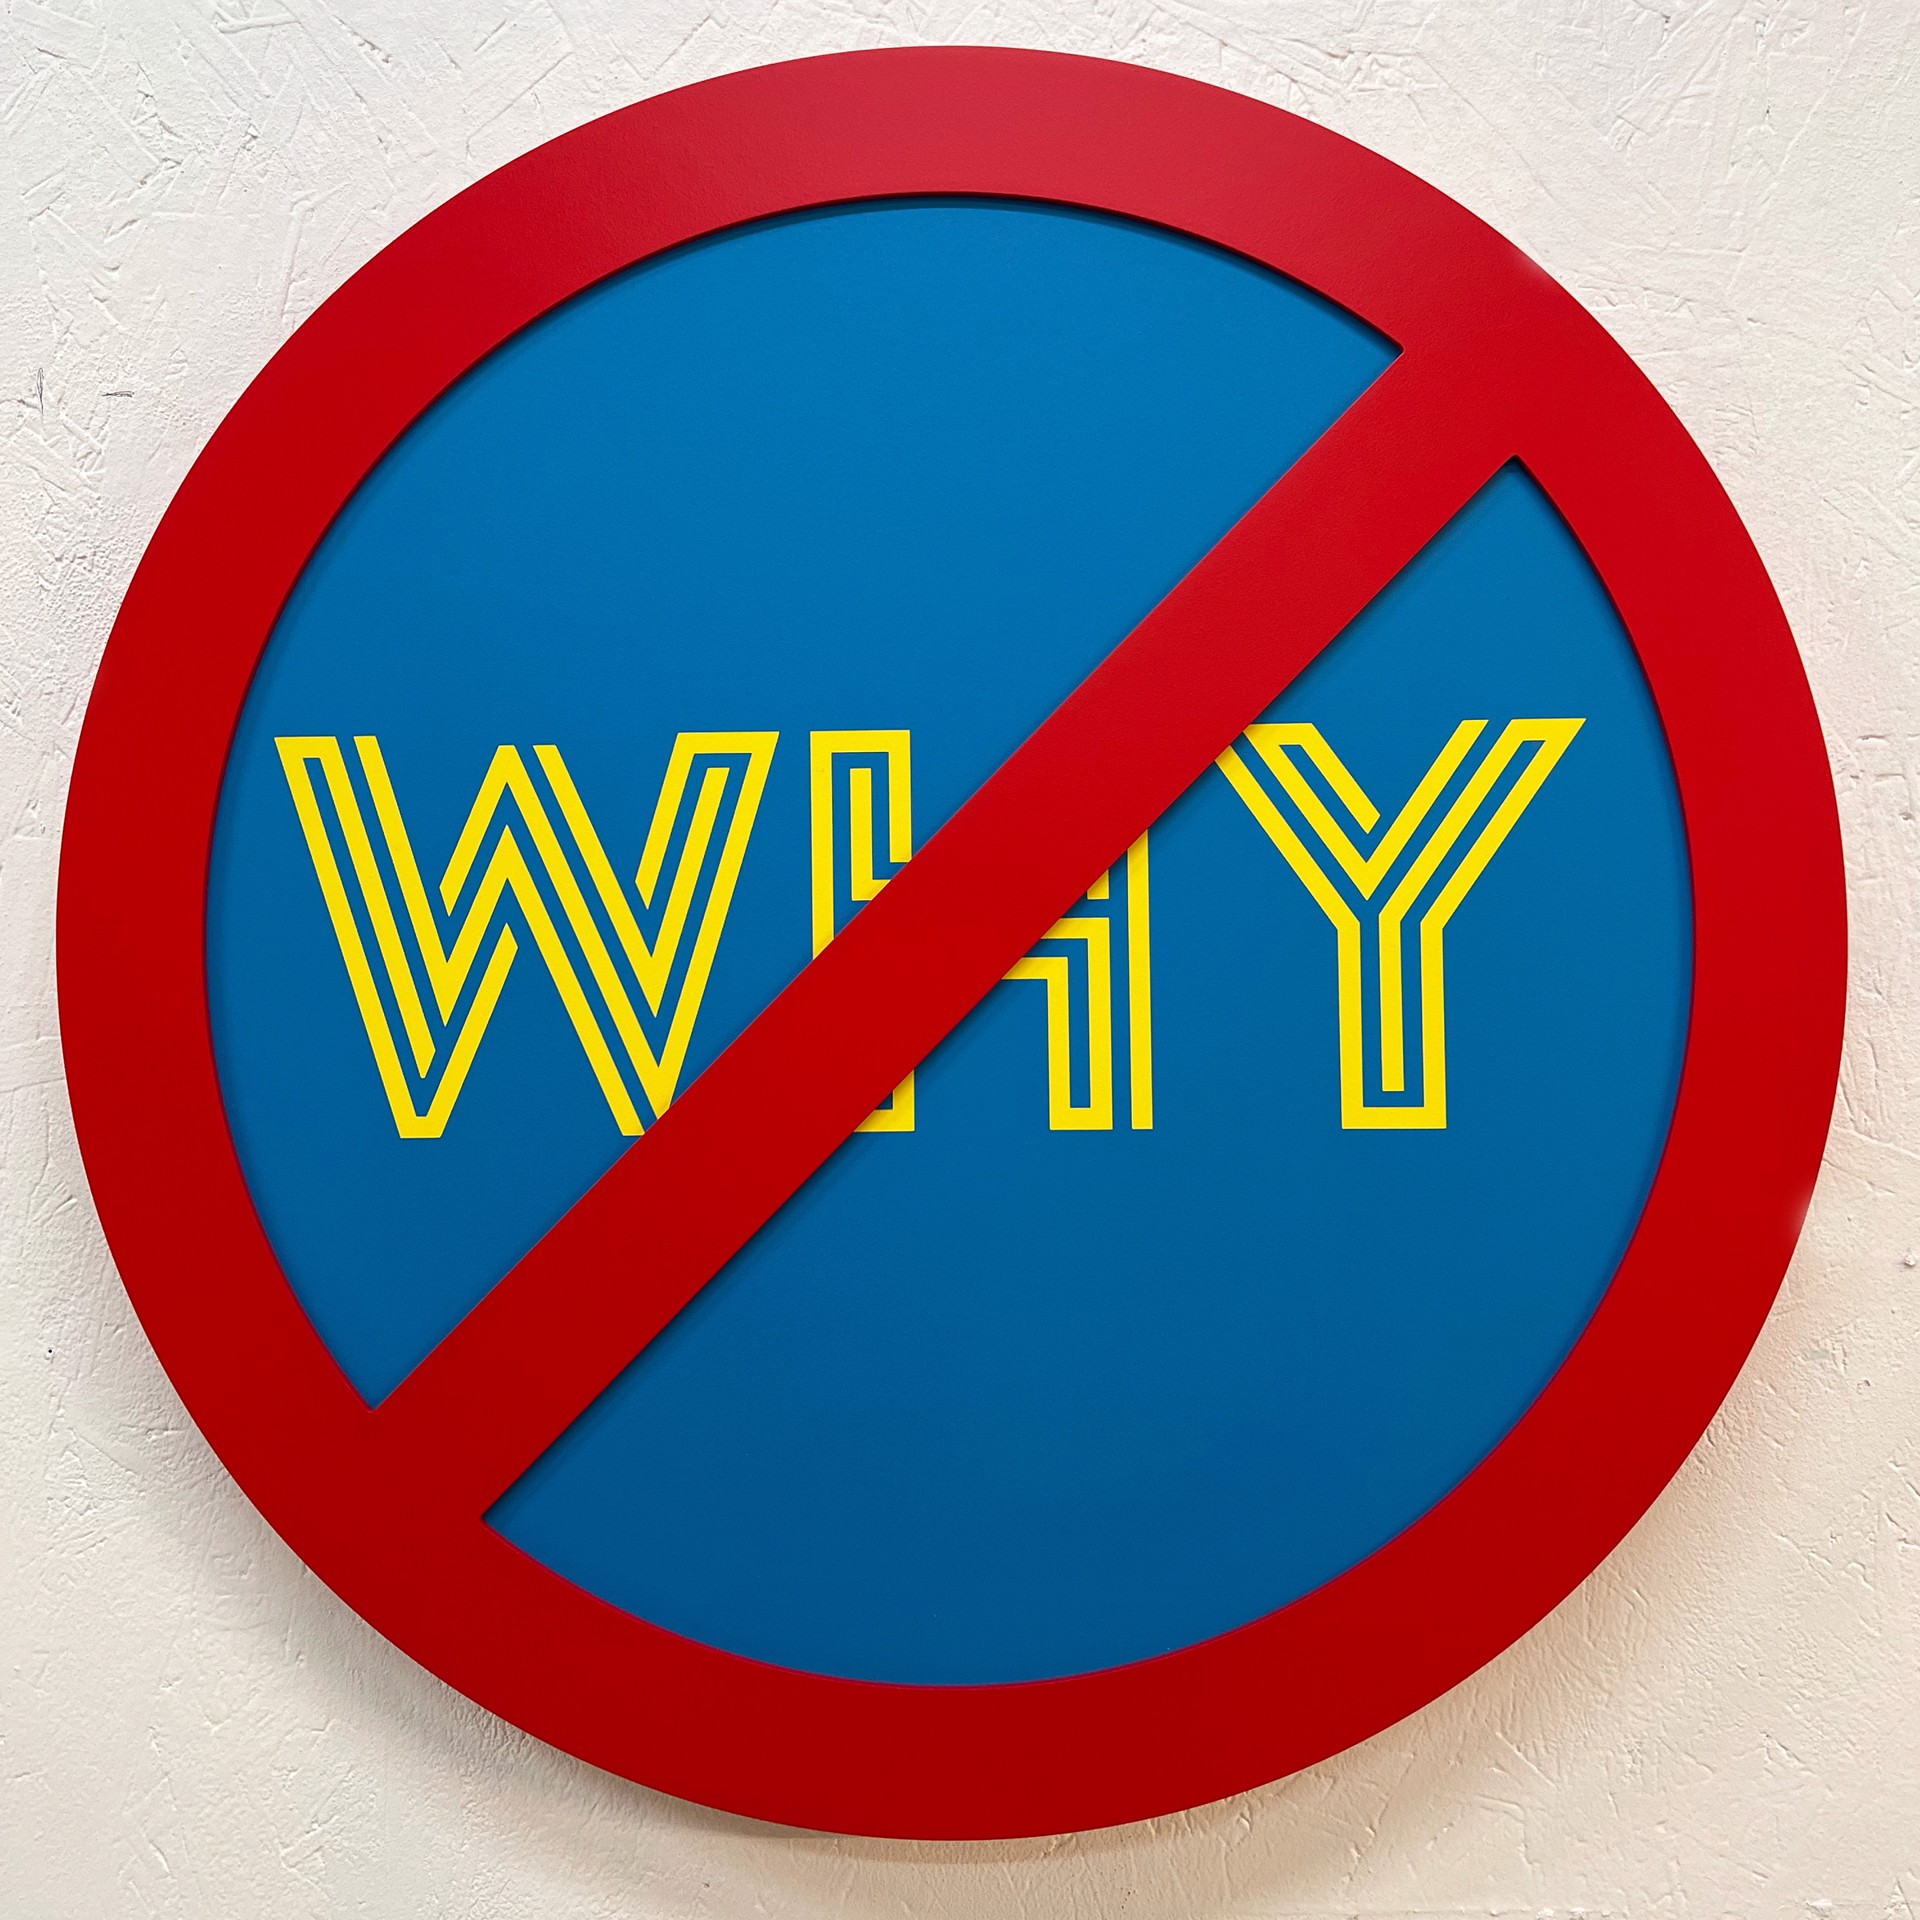 No Why (Yellow on Blue) by Michael Porten